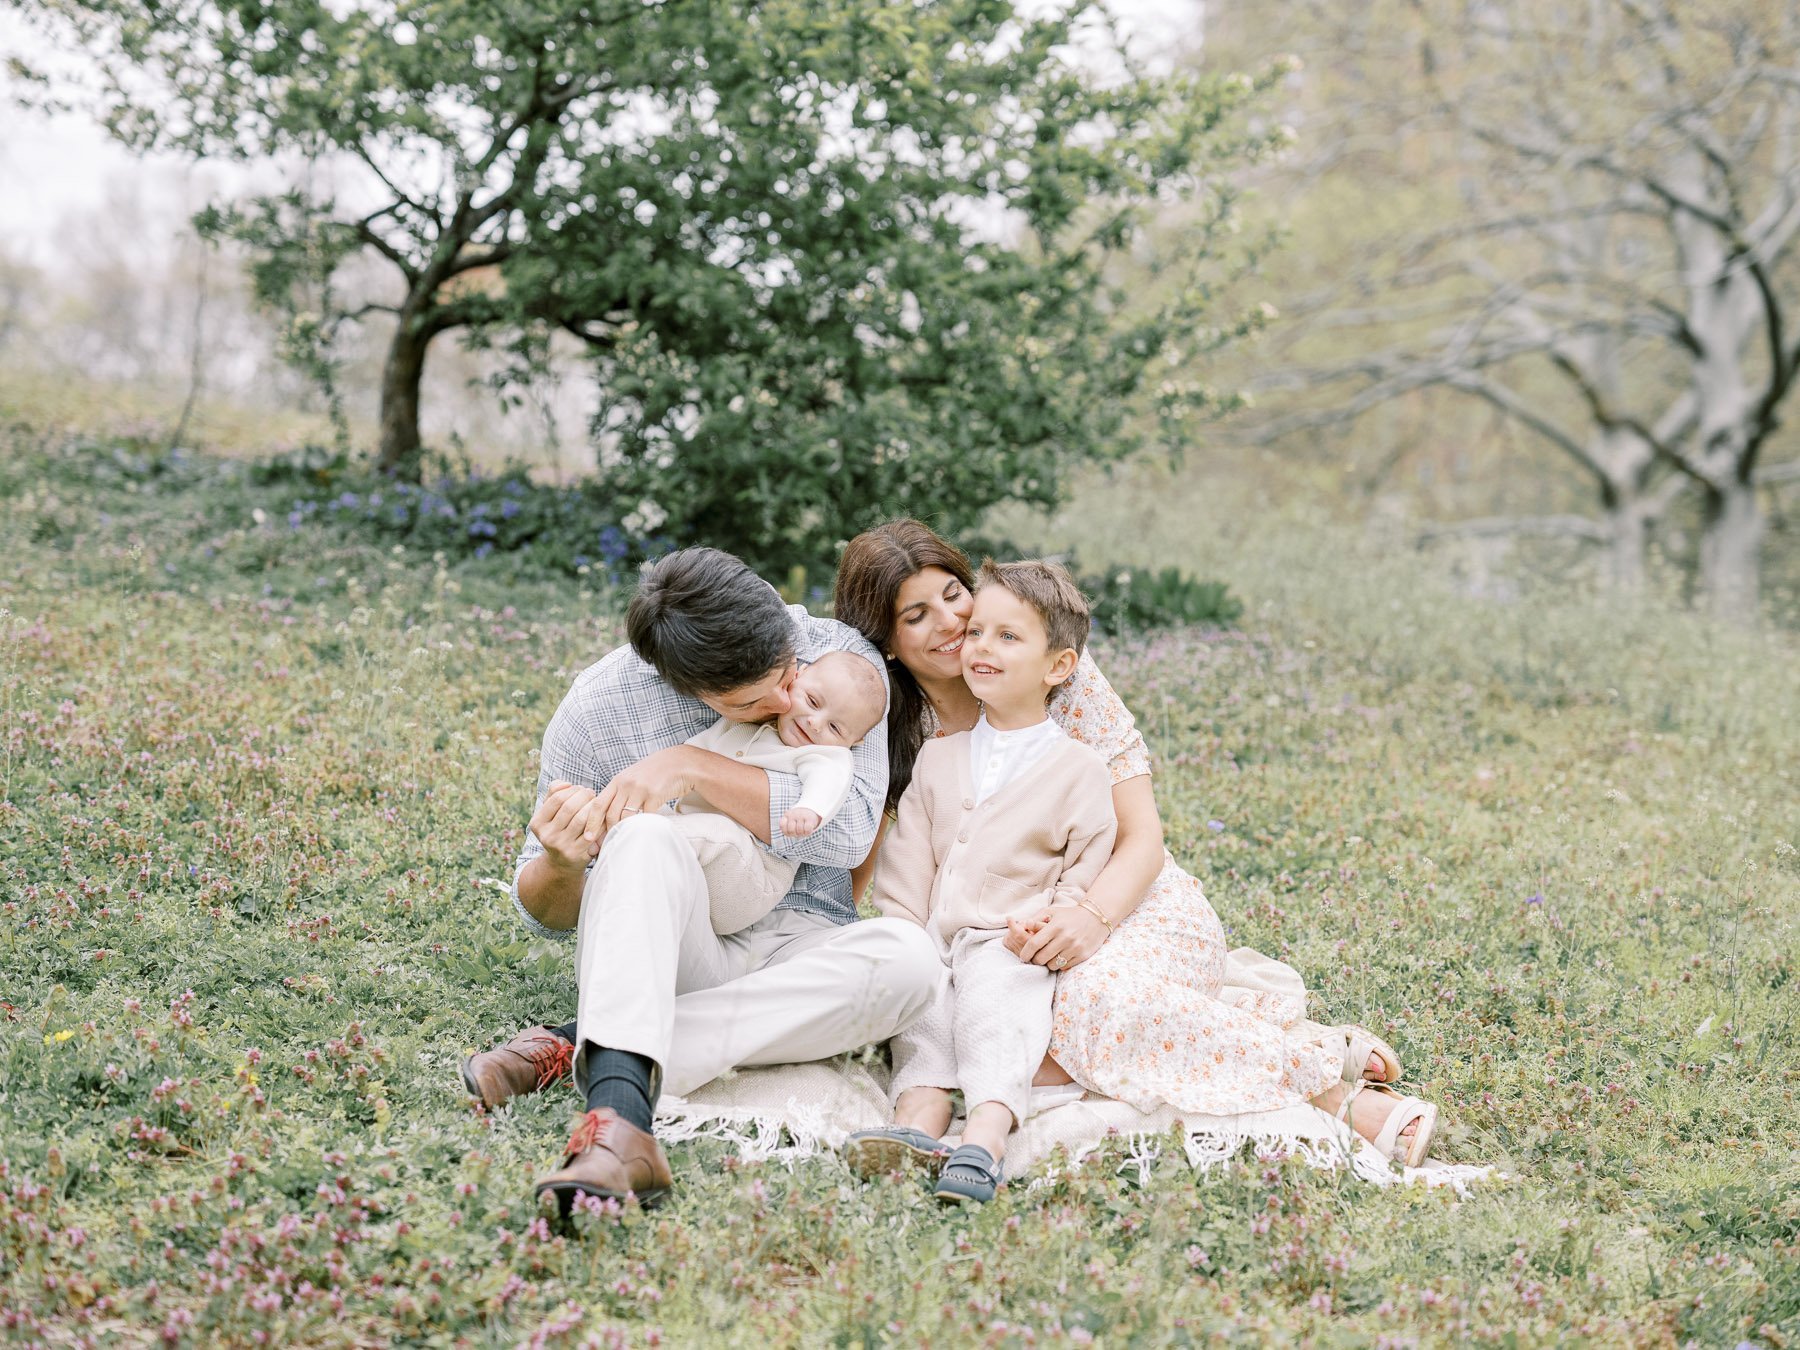 NYC Blossom family portraits by Michelle Lange Photography-37.jpg